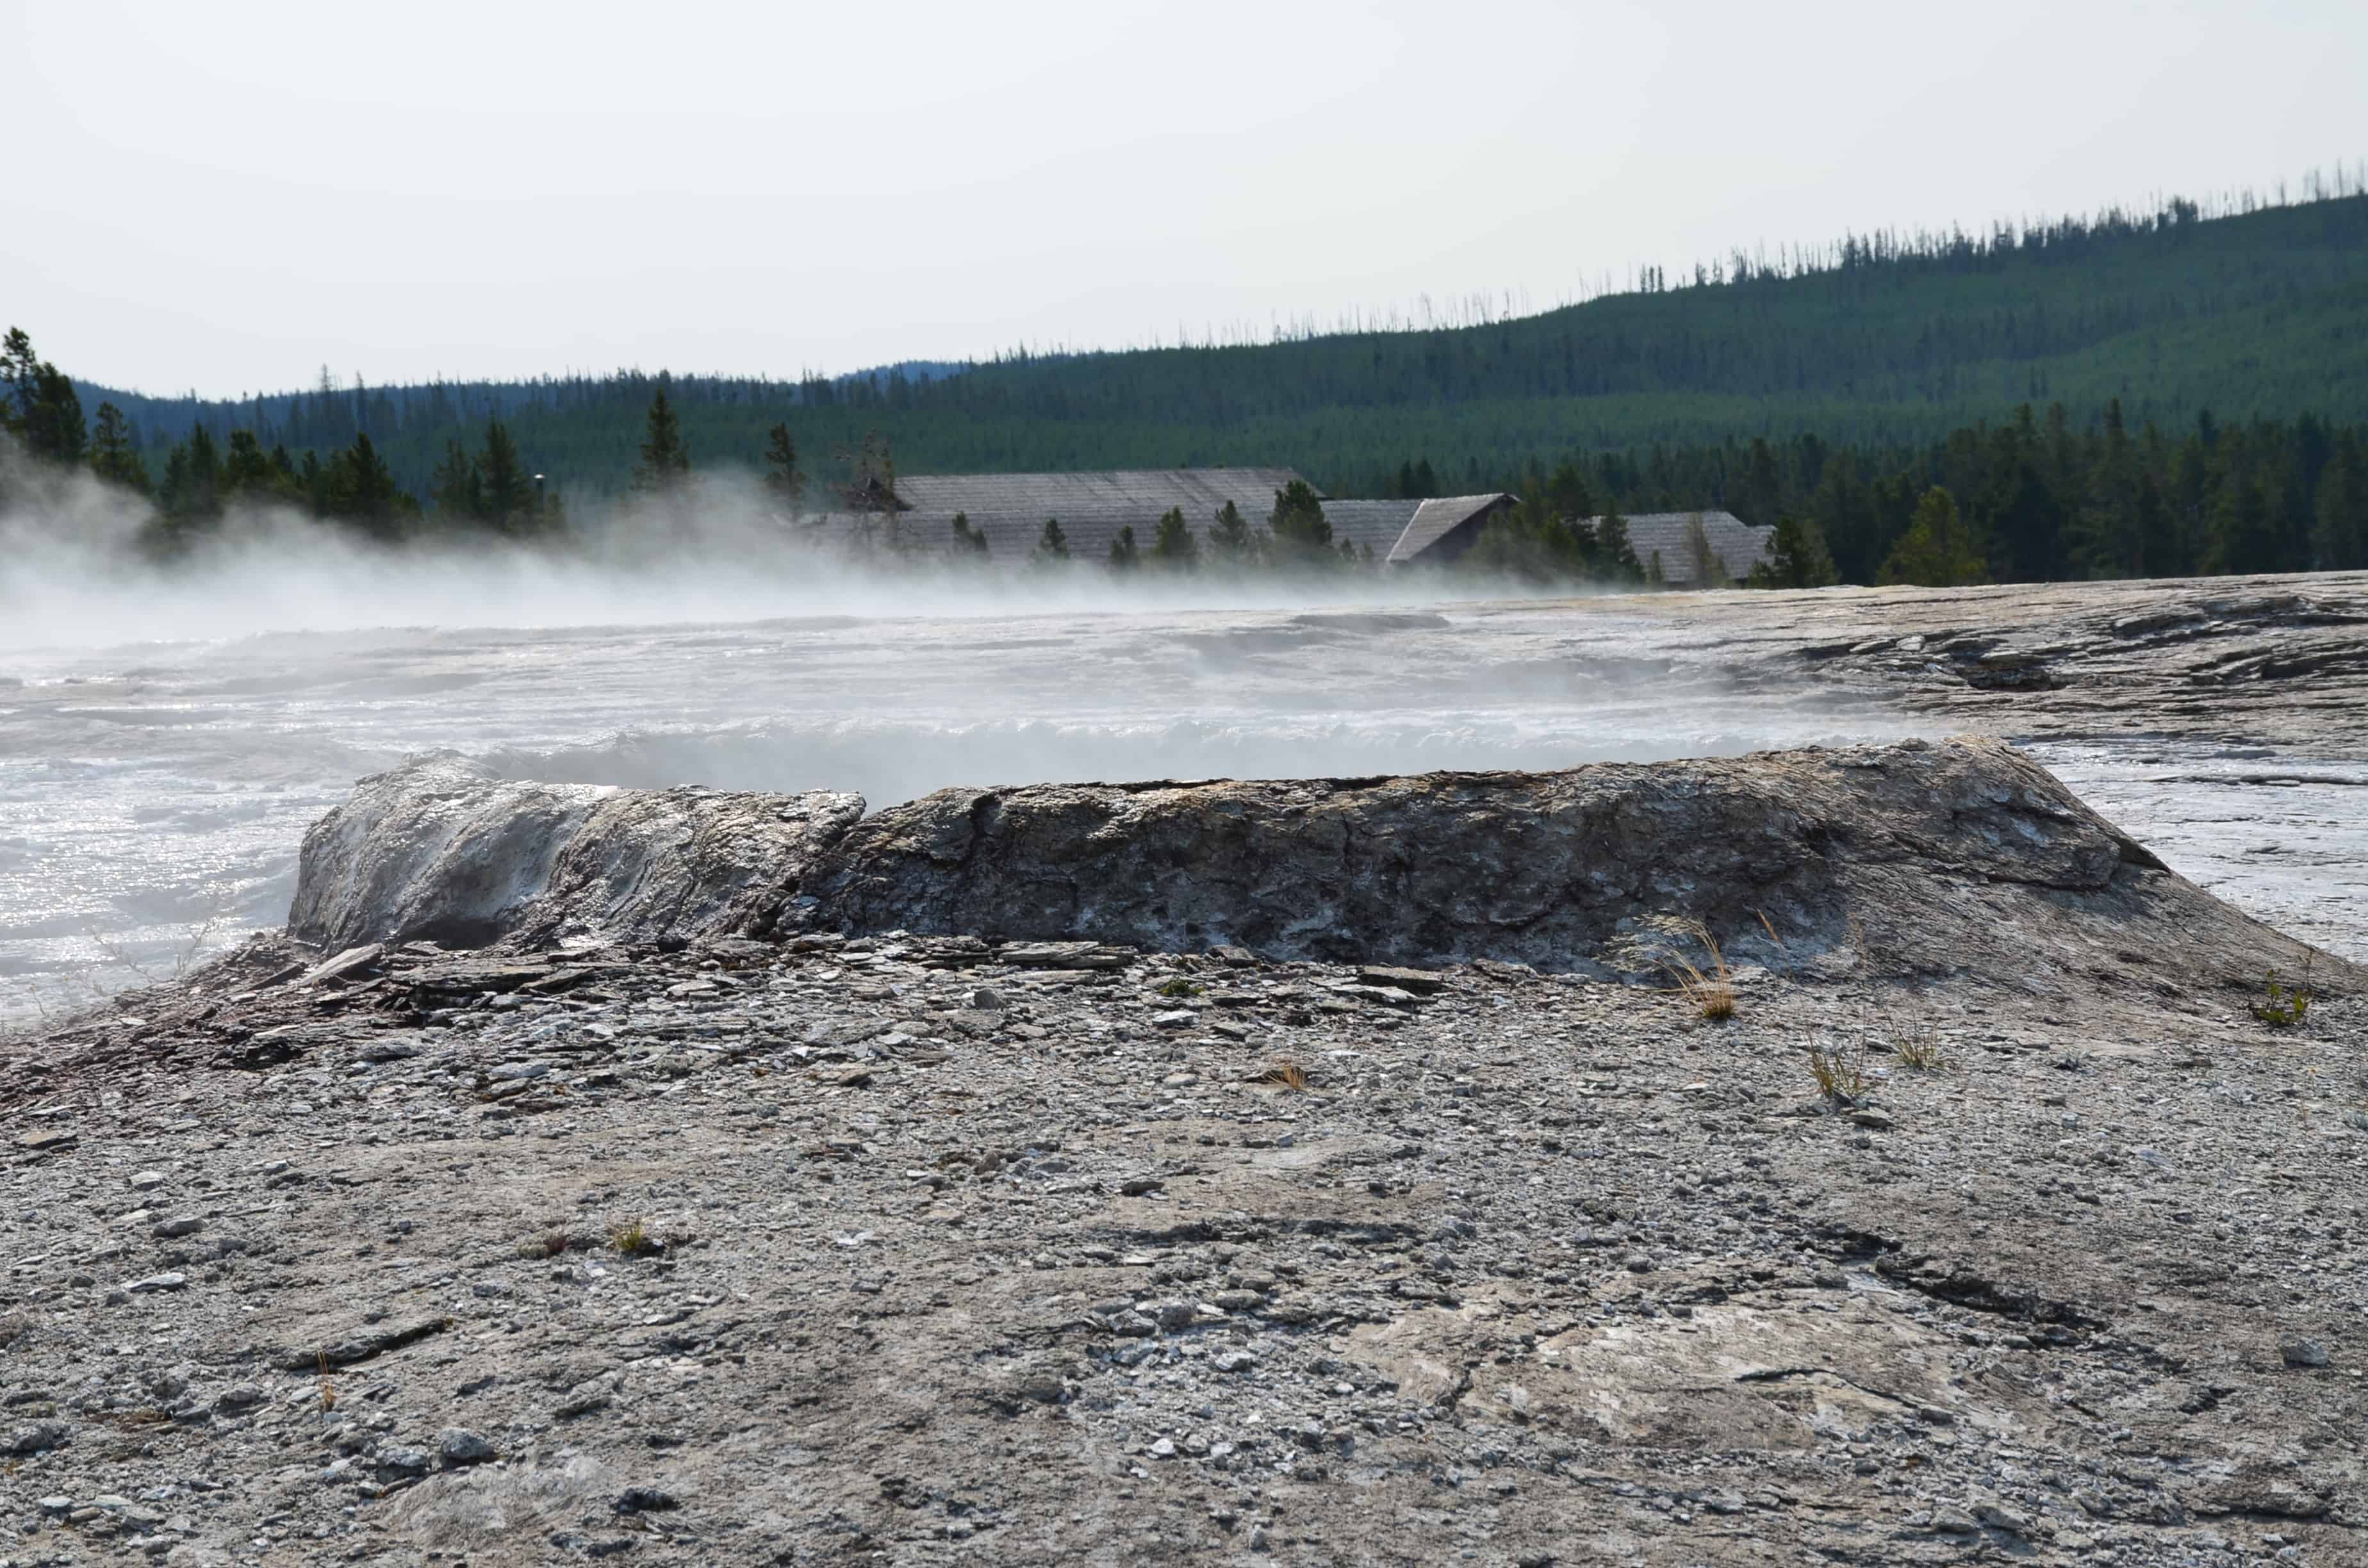 Teakettle Spring on Geyser Hill at the Upper Geyser Basin in Yellowstone National Park, Wyoming